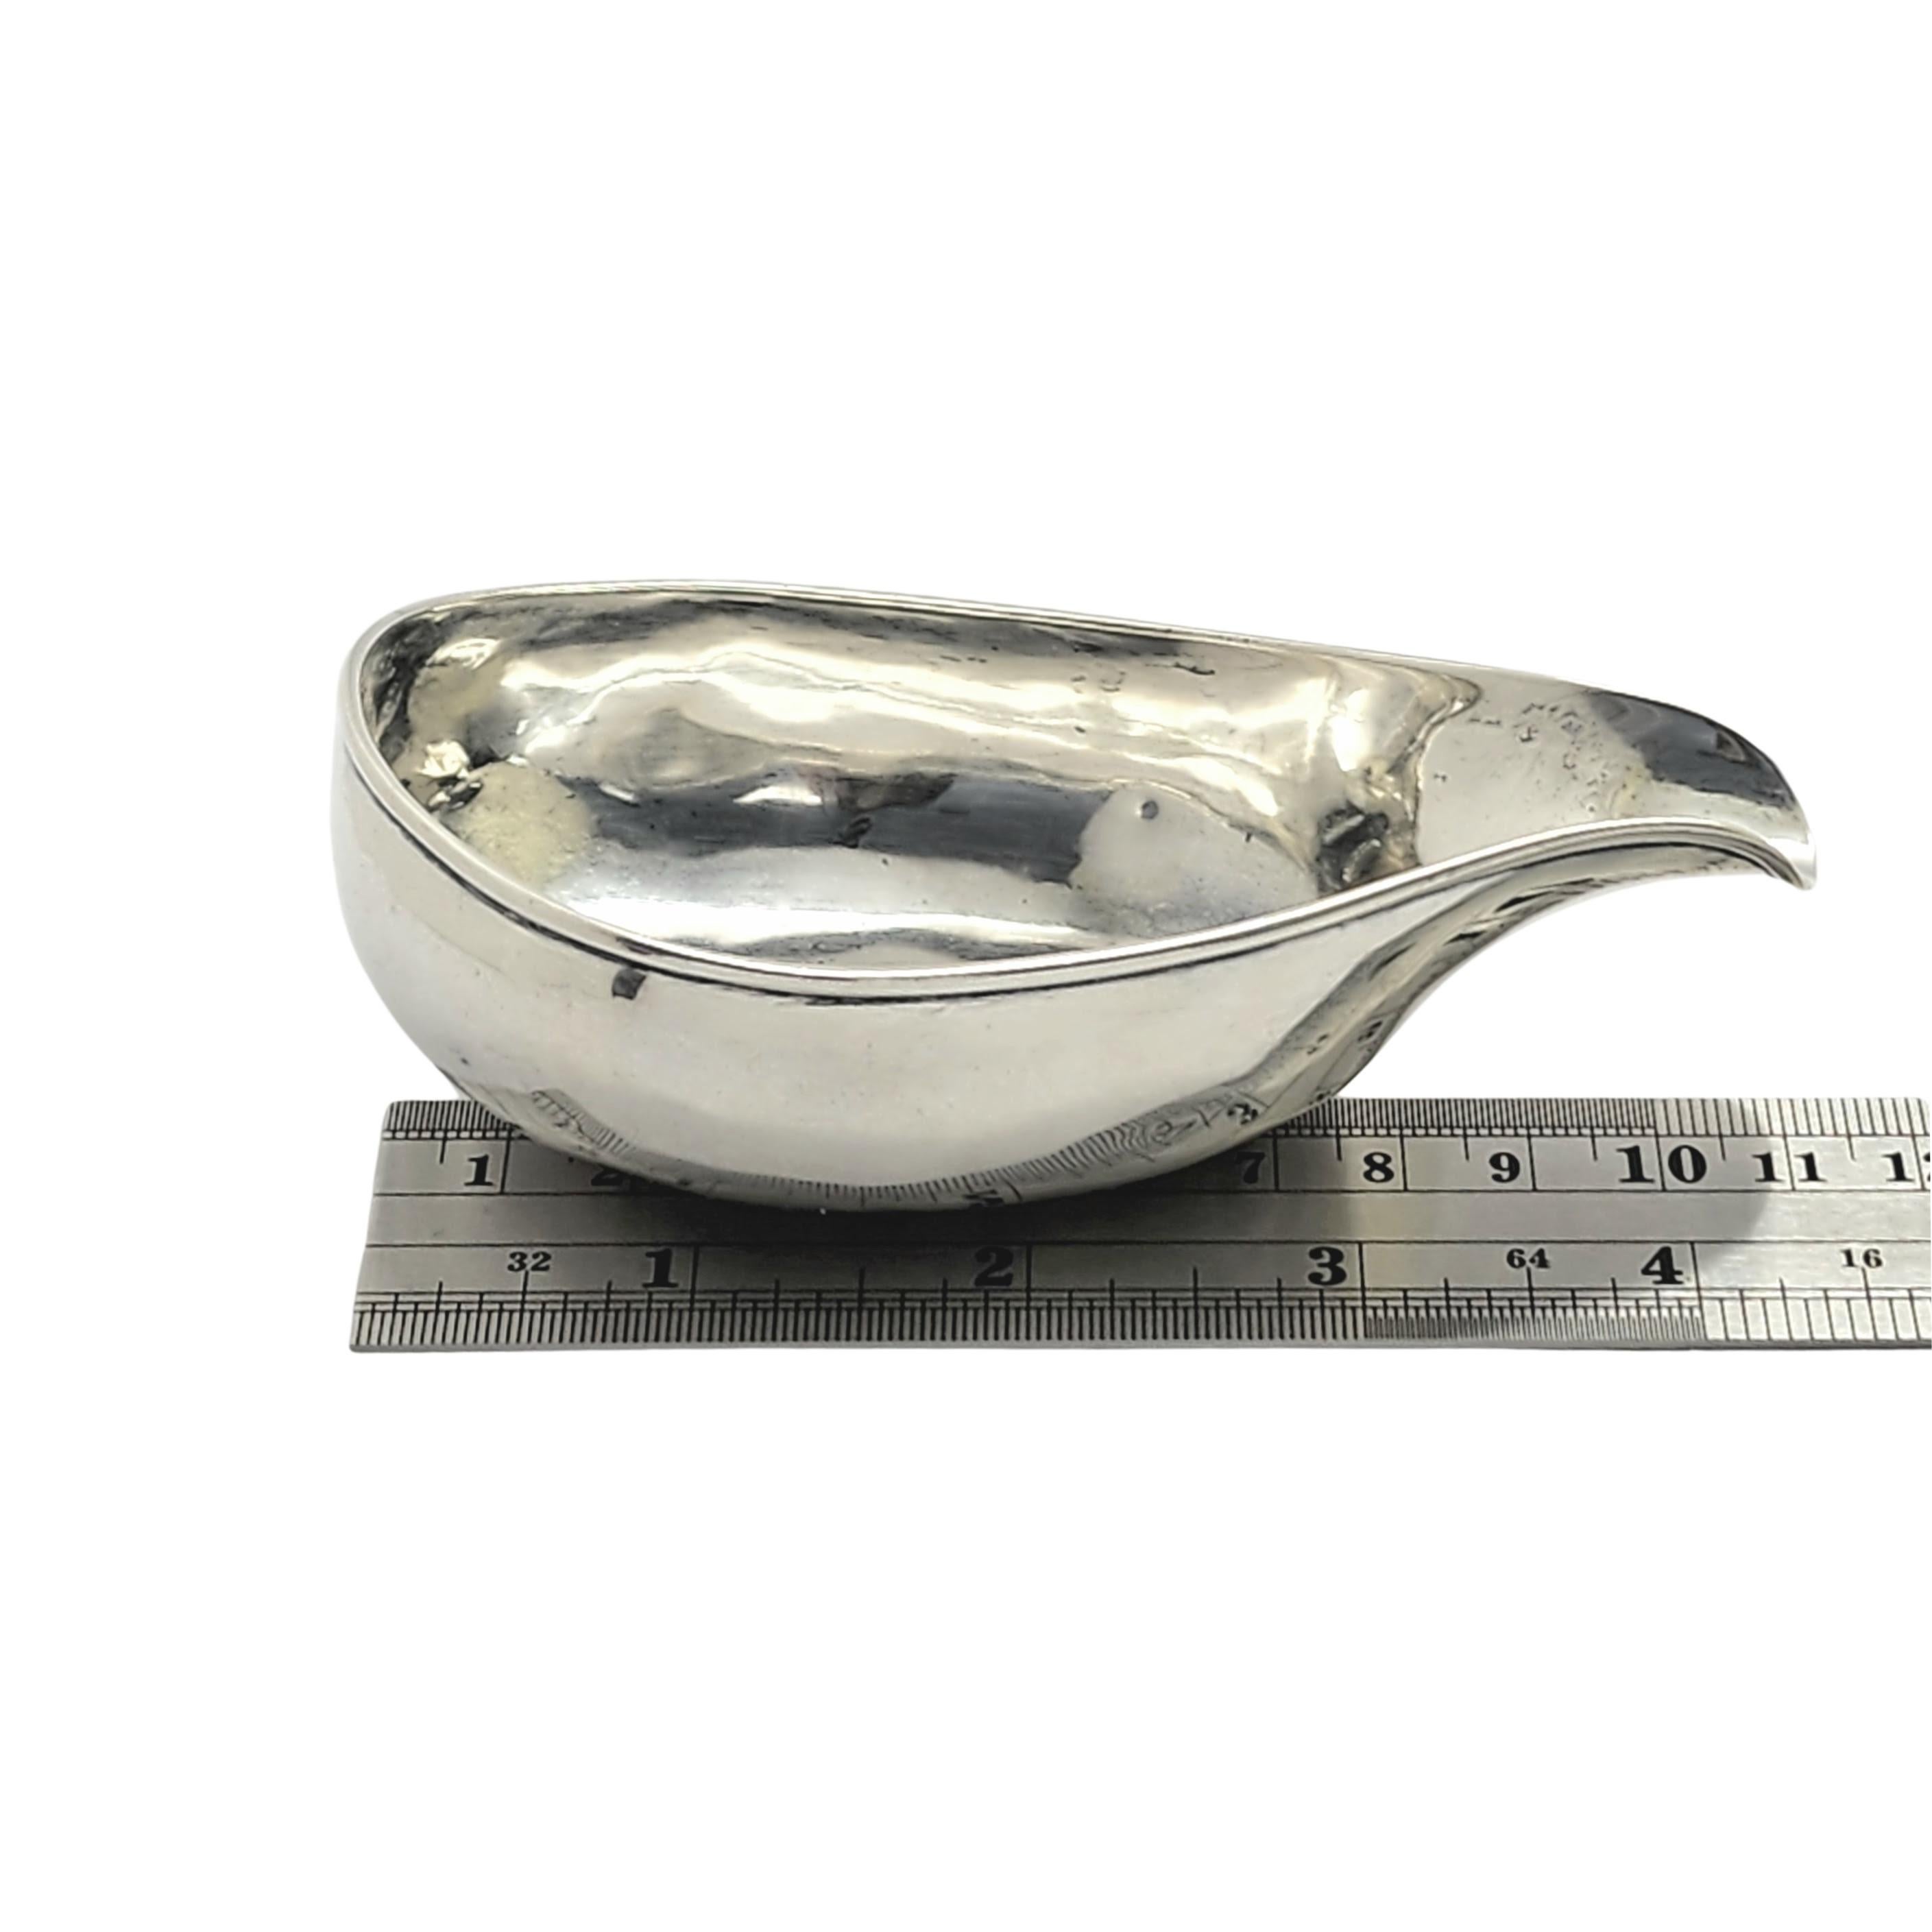 Antique English Sterling Silver Pap Boat For Sale 5